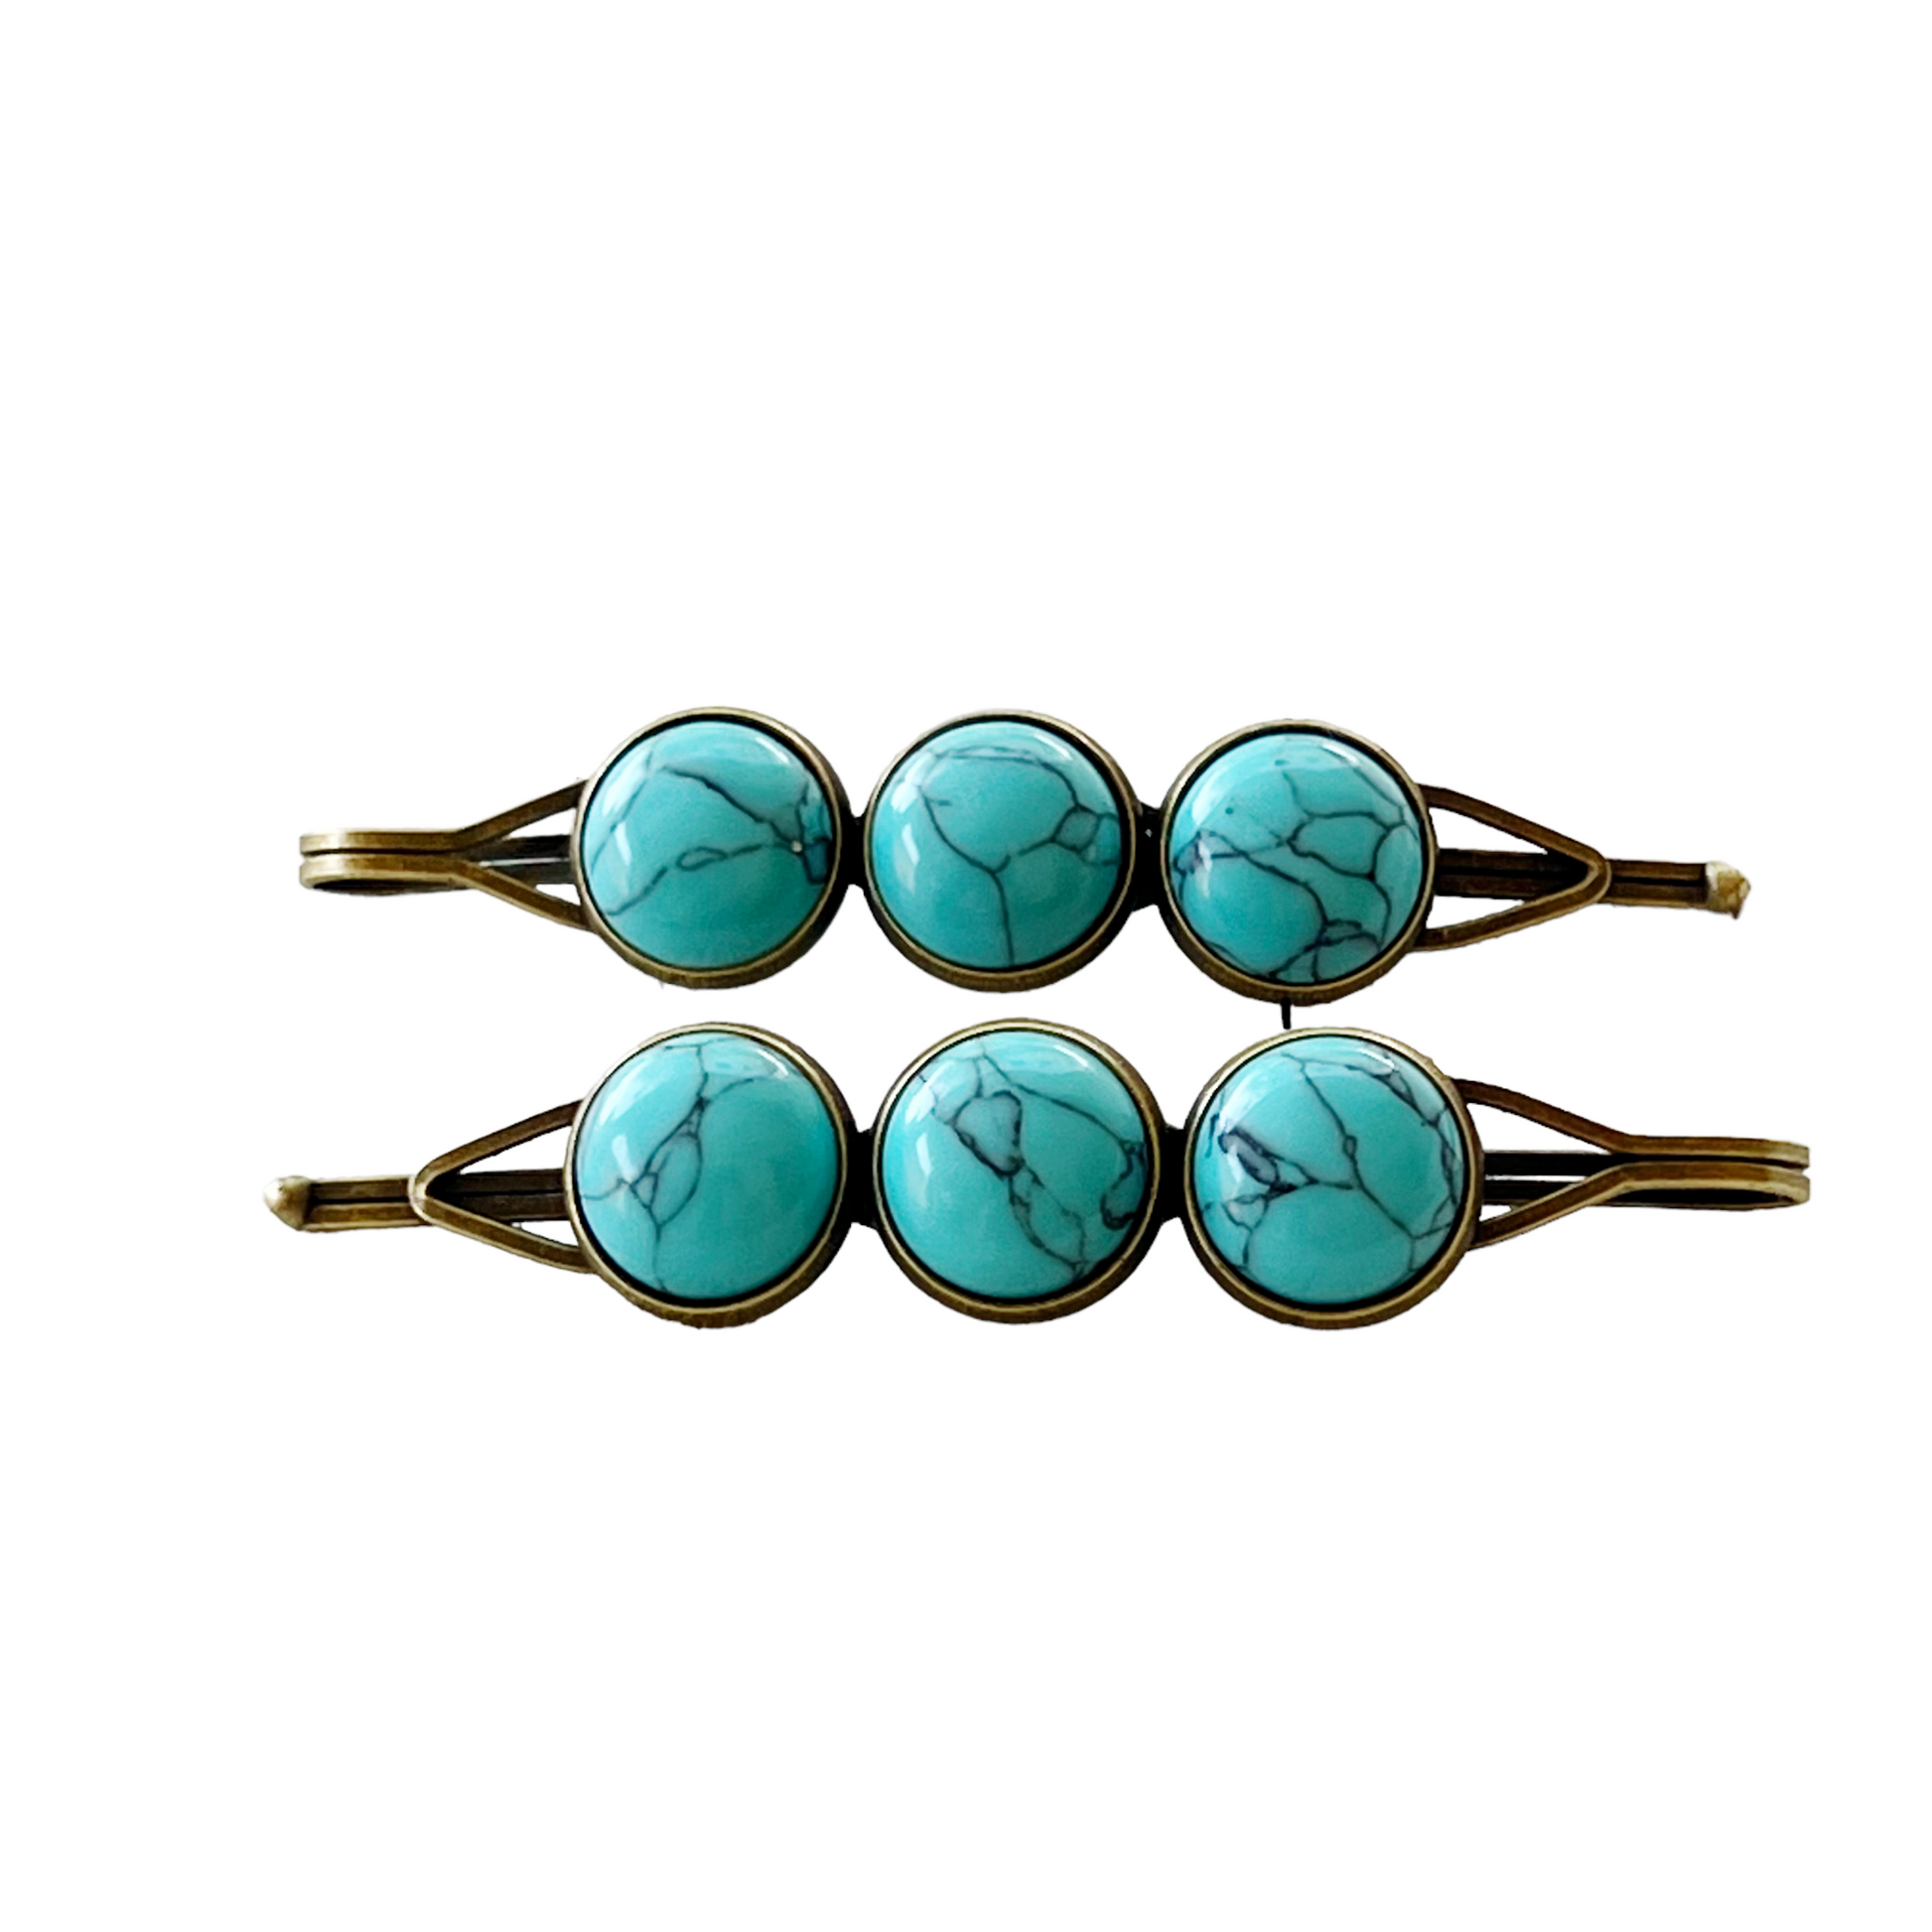 Turquoise Hair Pins - Western Cowgirl Decorative Brass Bobby Pins, Women's Southwestern Hair Accessories